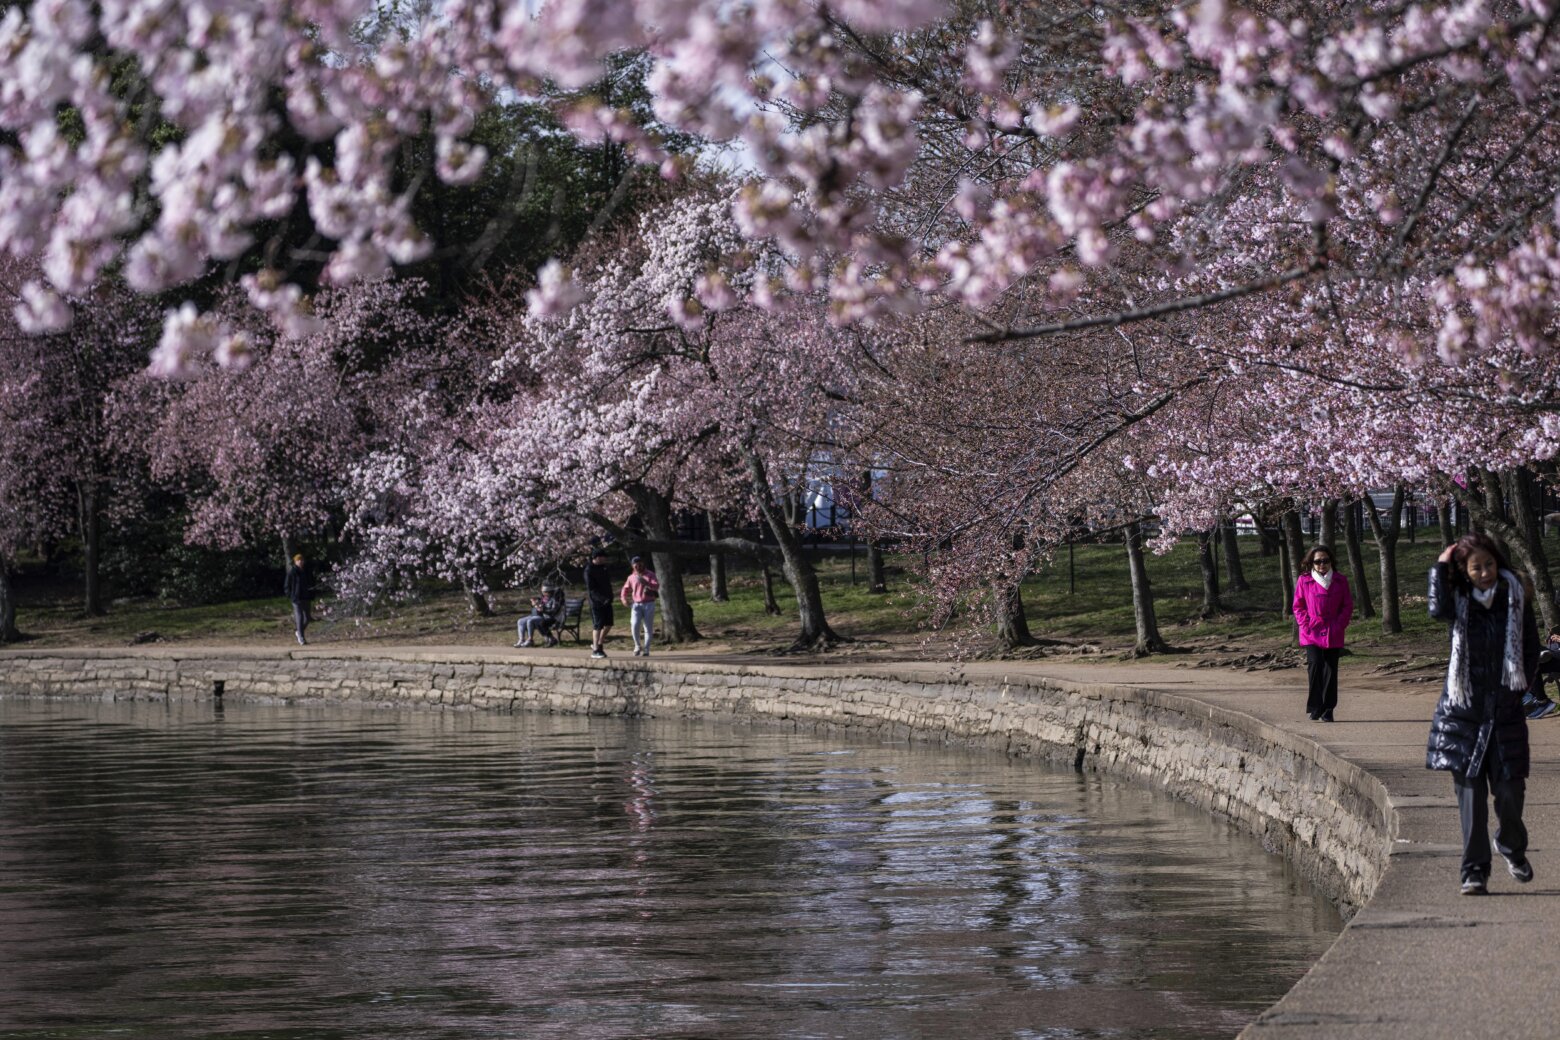 Are there any Tidal Basin cherry trees left from the original plantings over 100 years ago?